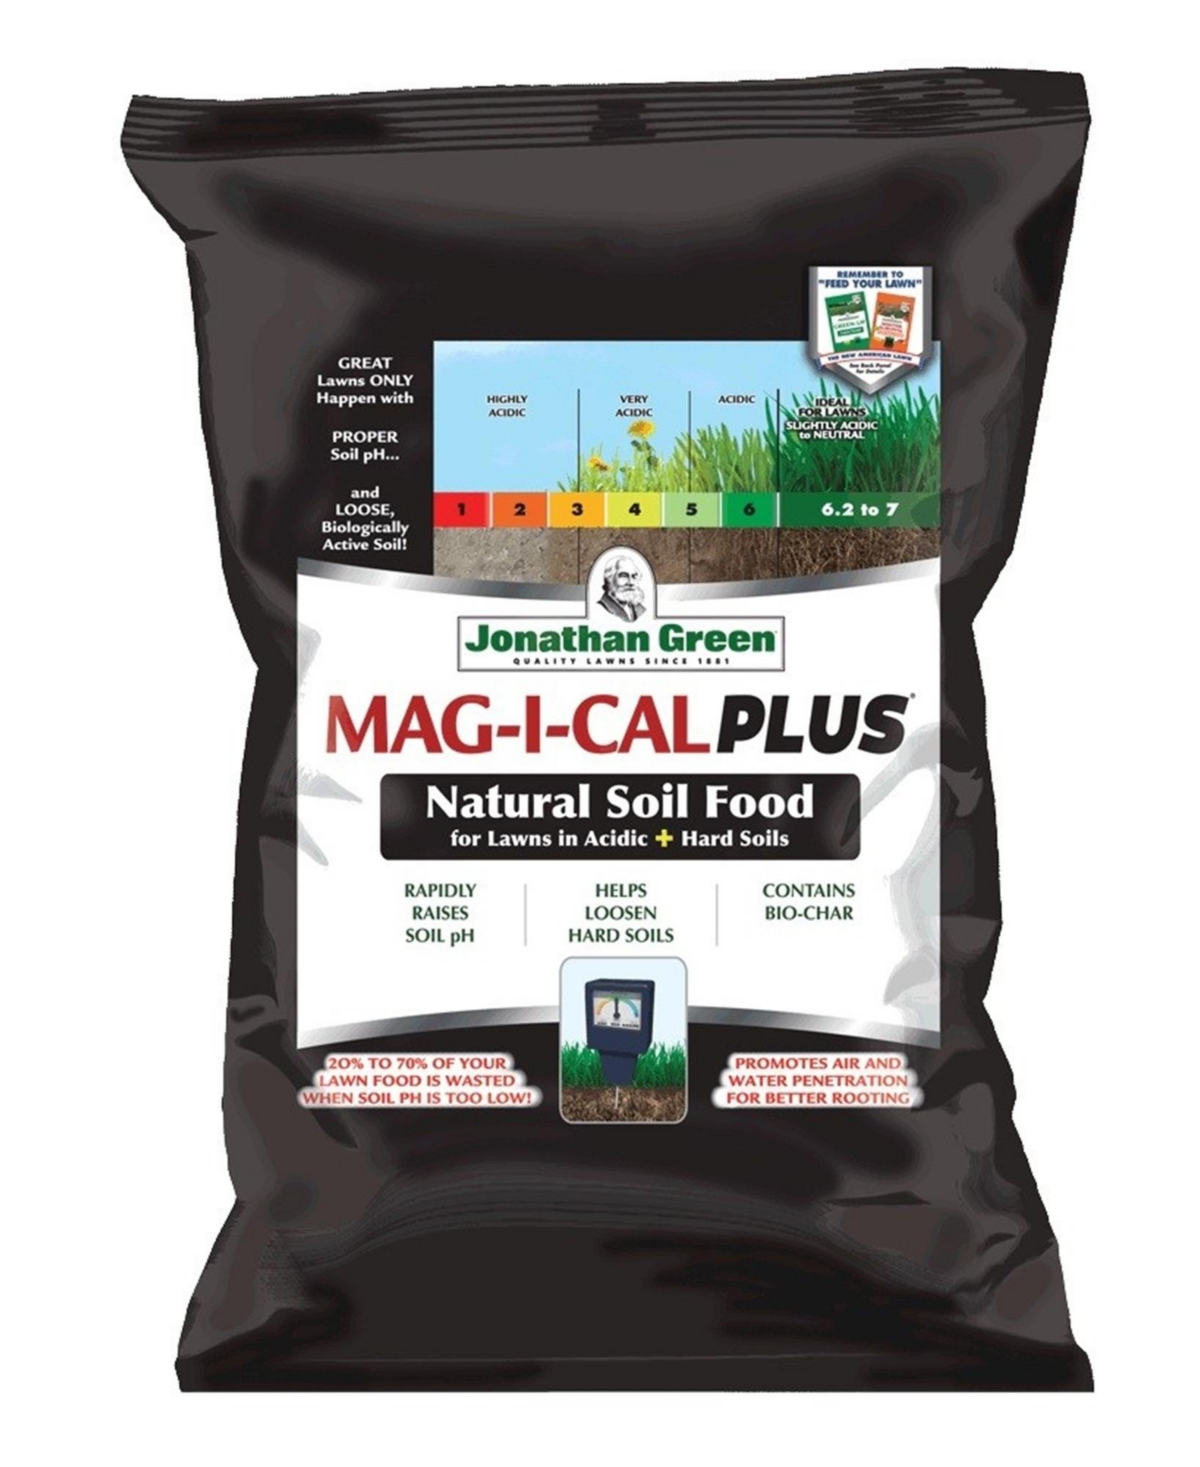 Mag-i-cal Plus for Lawns in Acidic Hard Soils, 54 15M - Open Miscellaneous